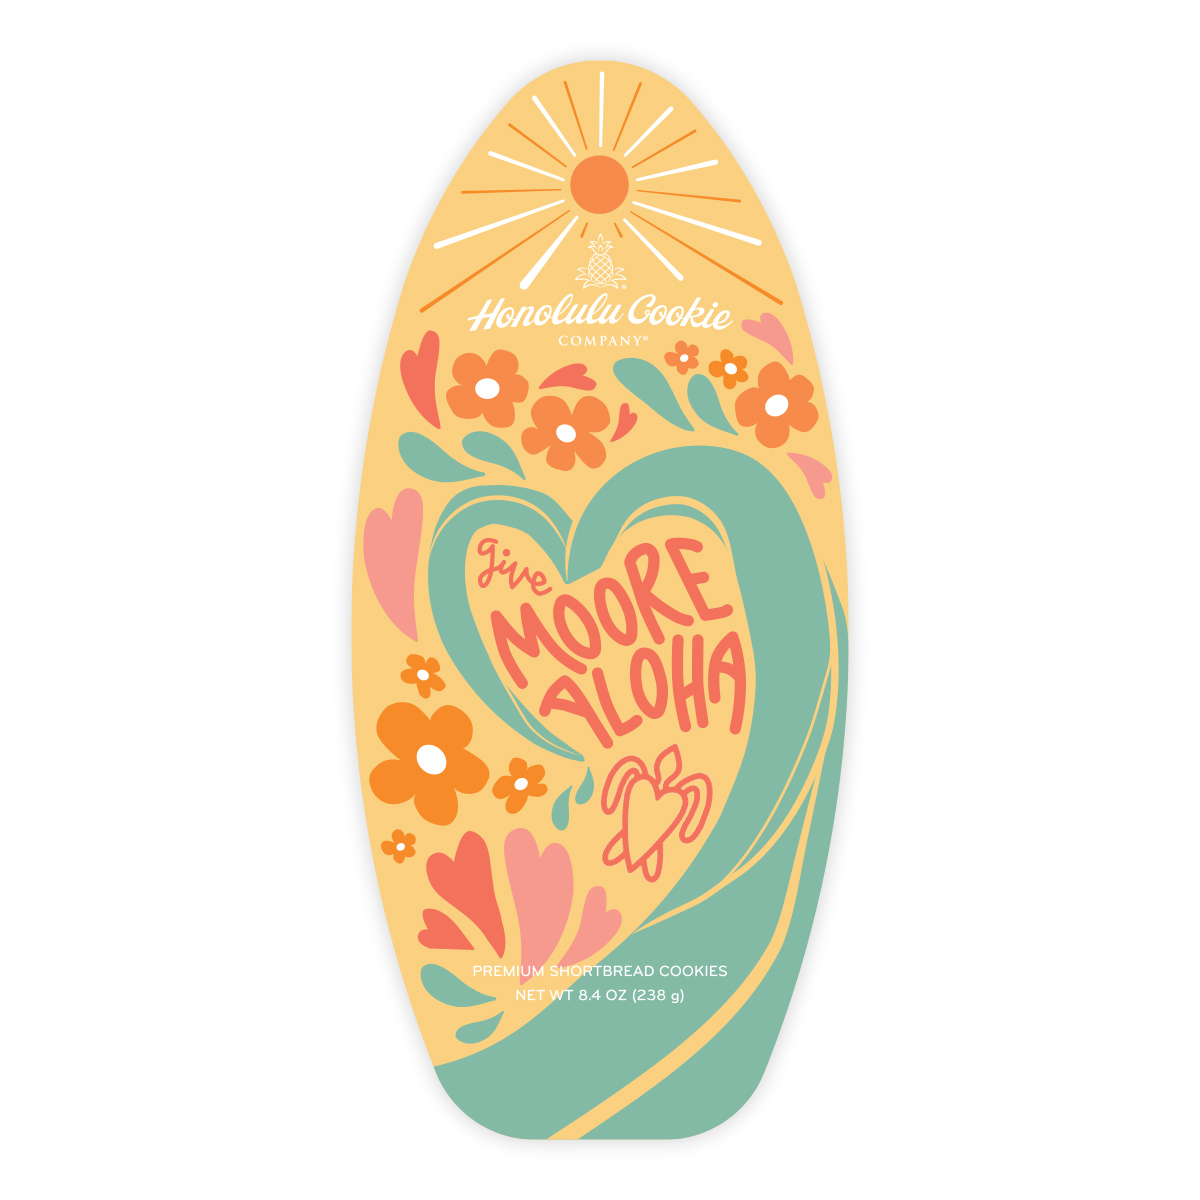 Graphic of a surboard with text, "Give Moore Aloha."